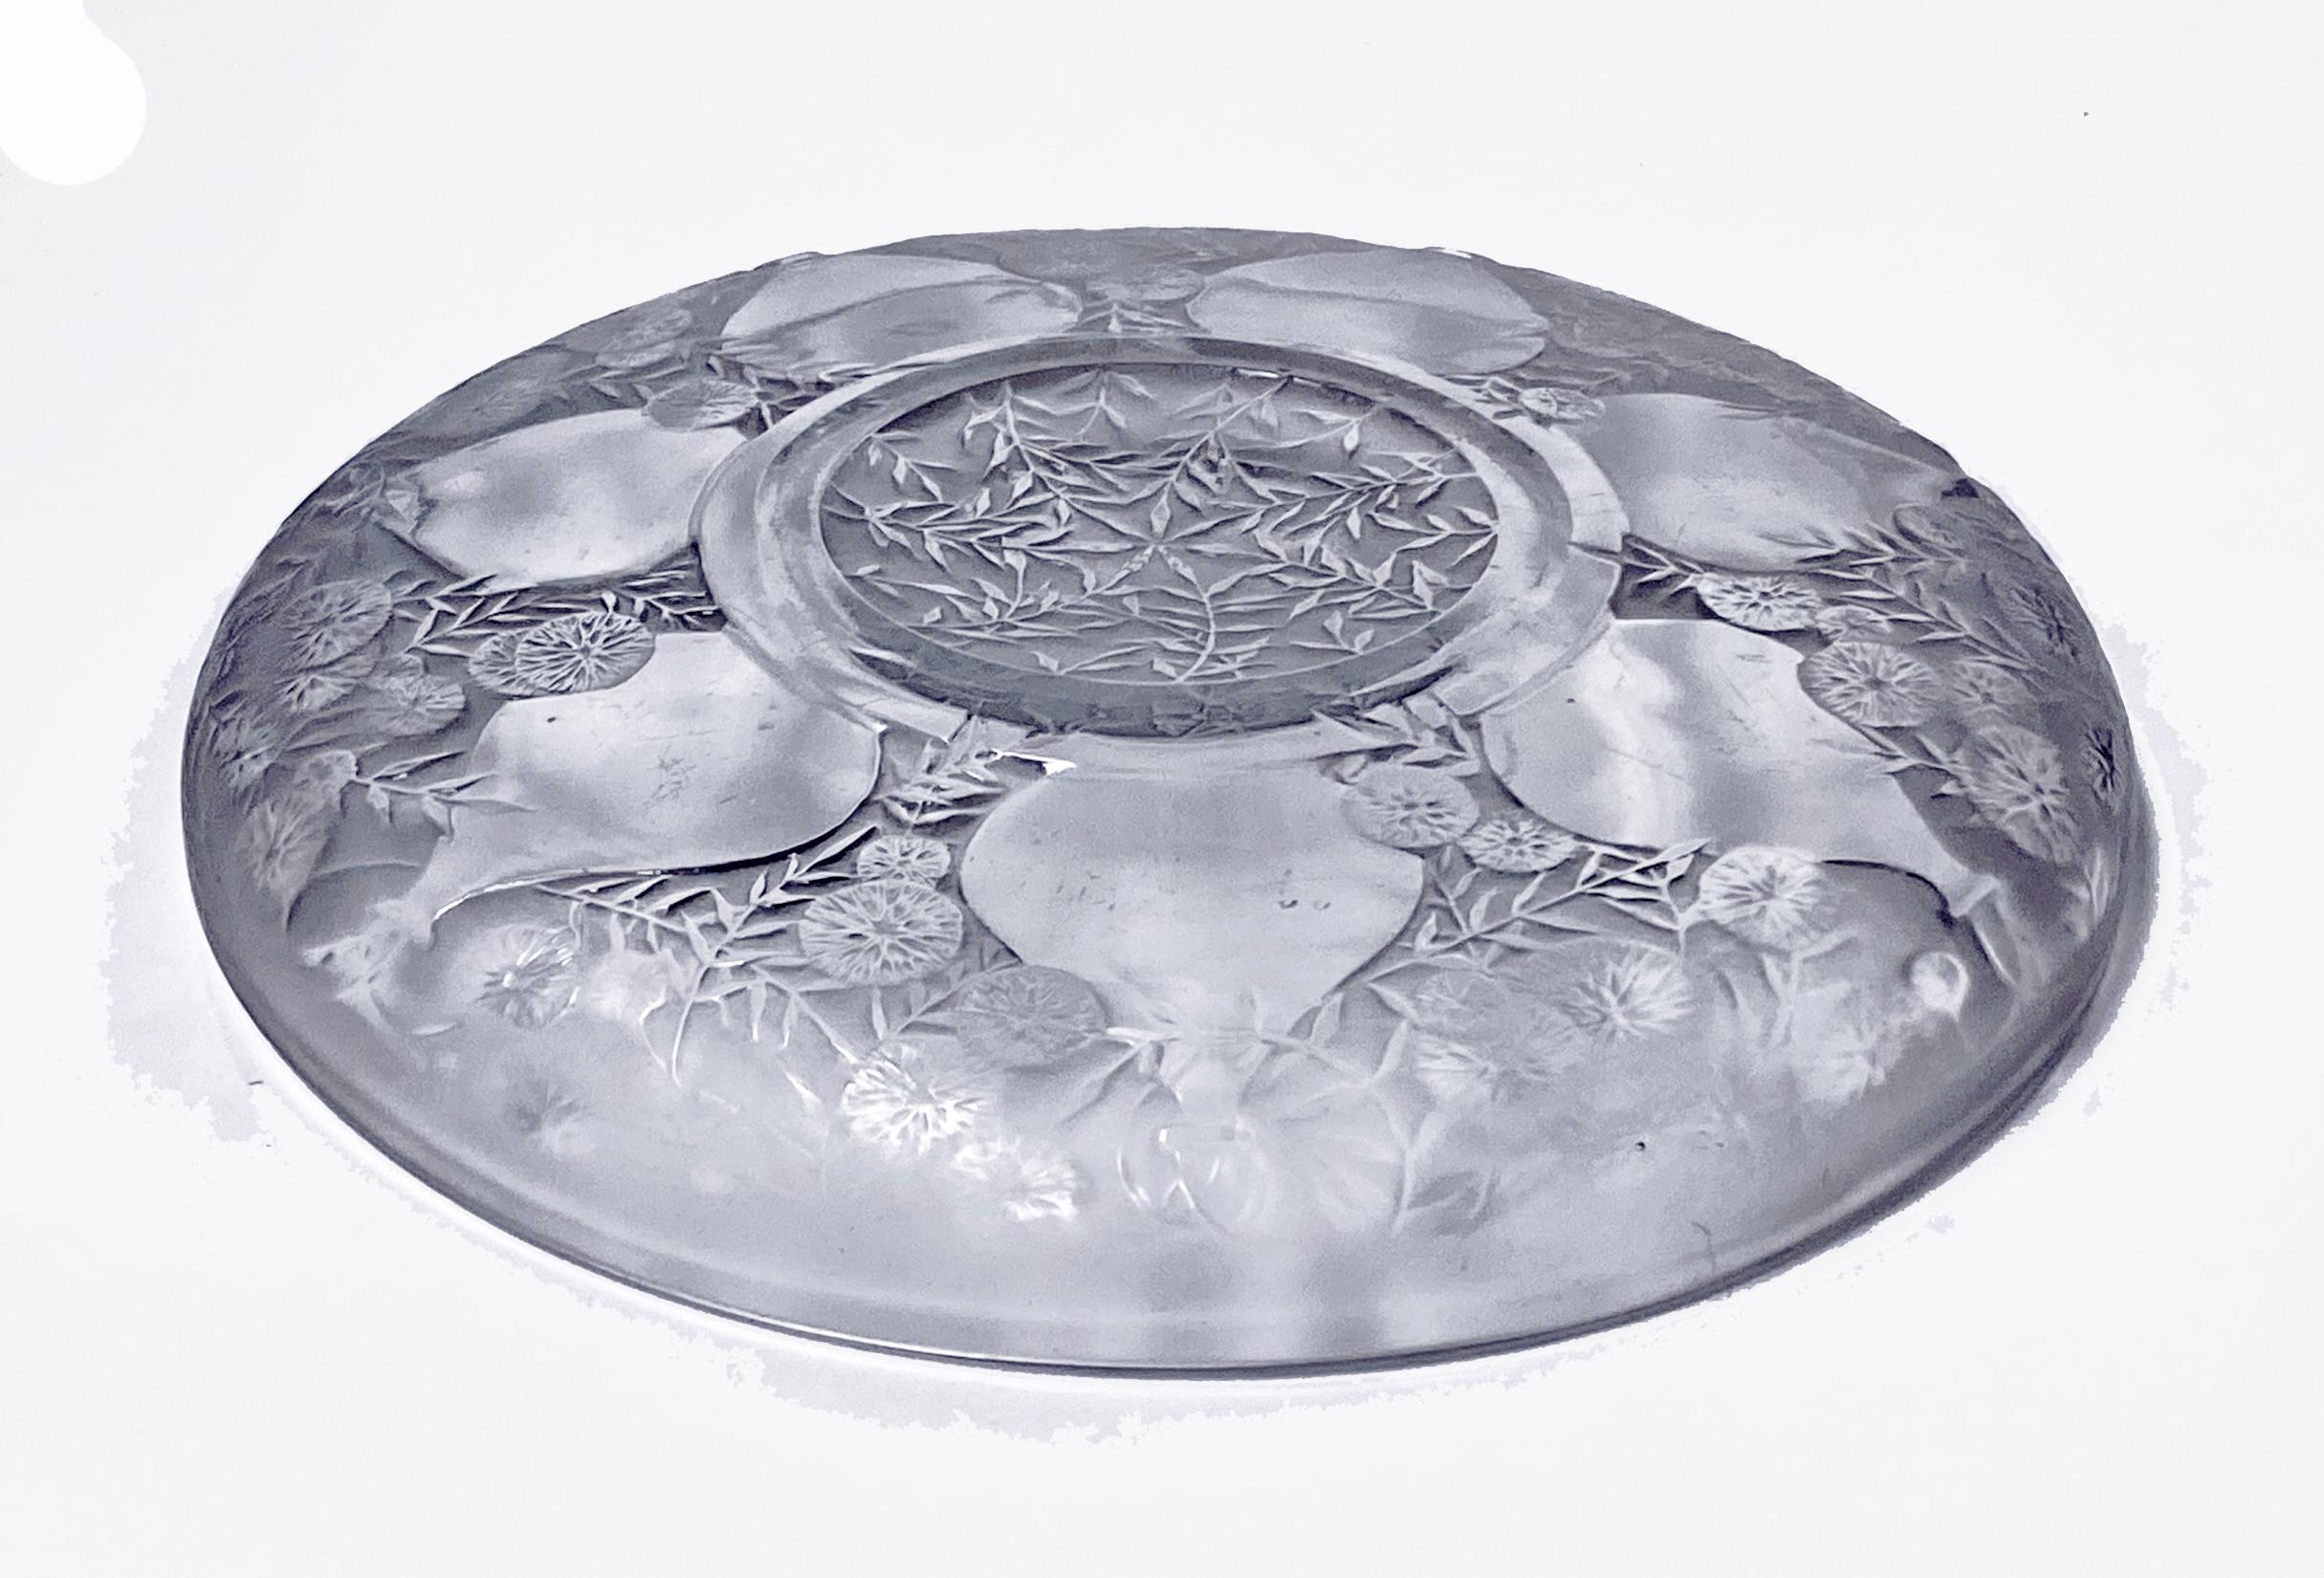 1920's René Lalique Verrerie D'alsace Shallow Bowl Vases Dish In Good Condition For Sale In Toronto, Ontario